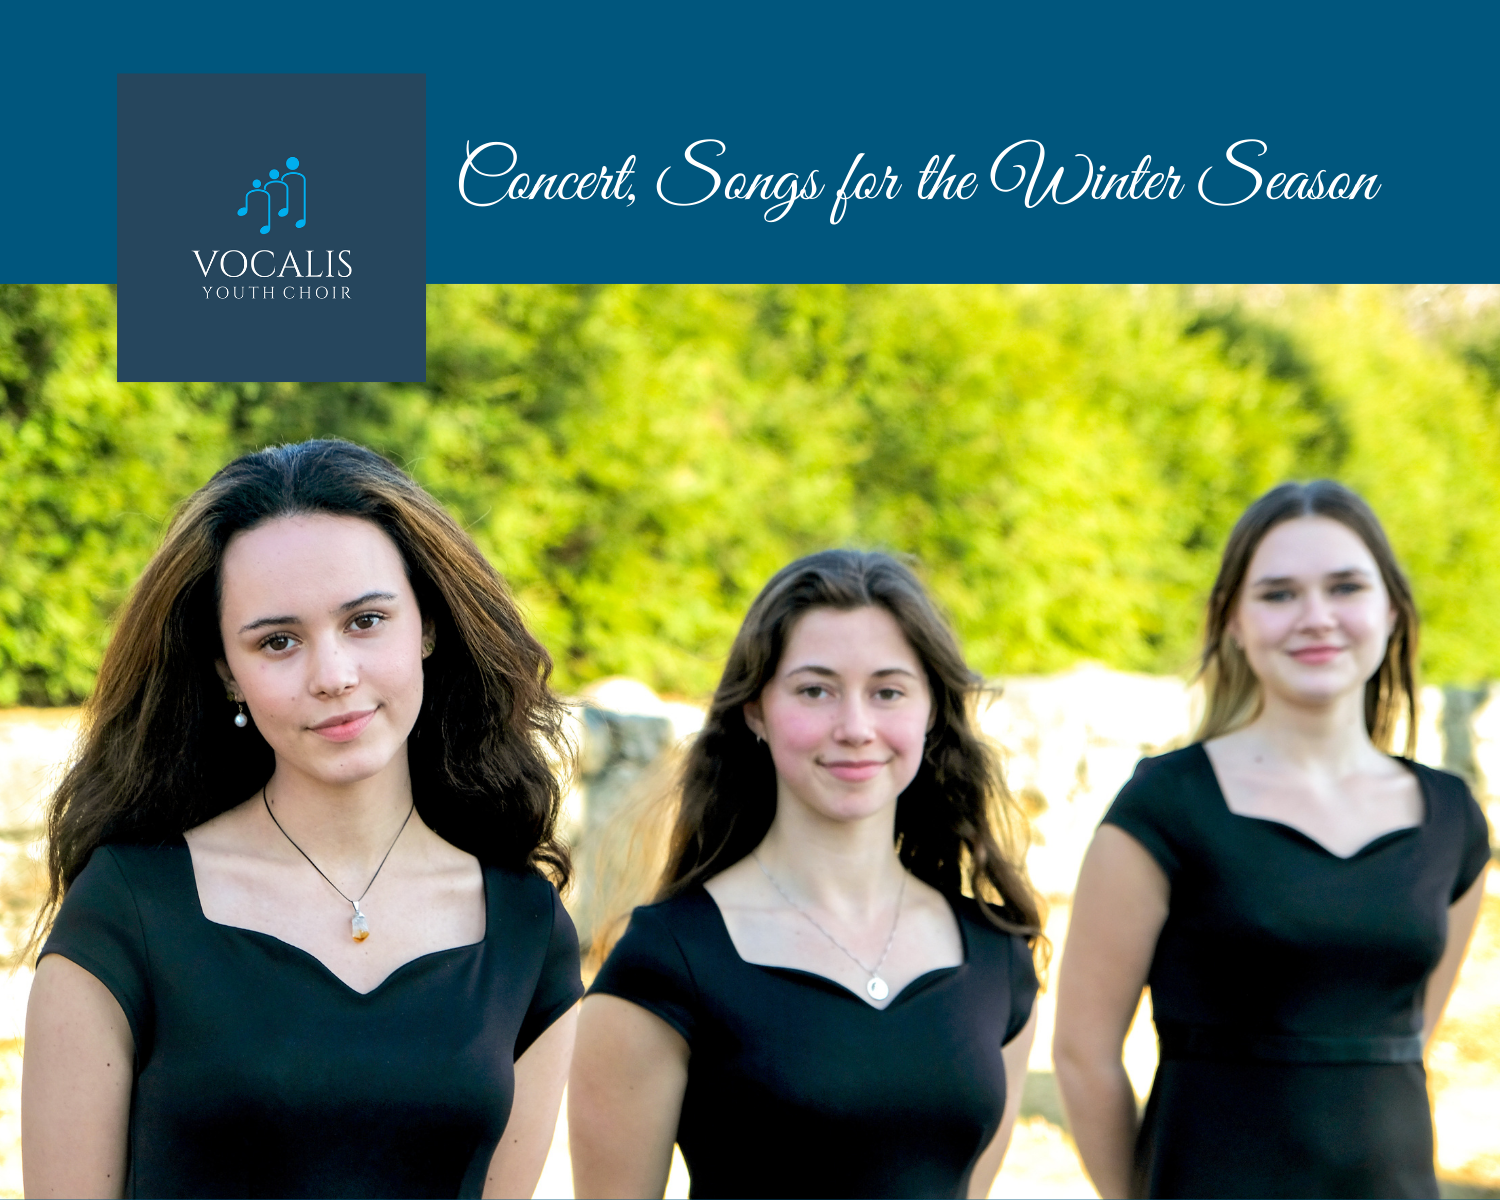 Vocalis Youth Choir: Songs for the Winter Season